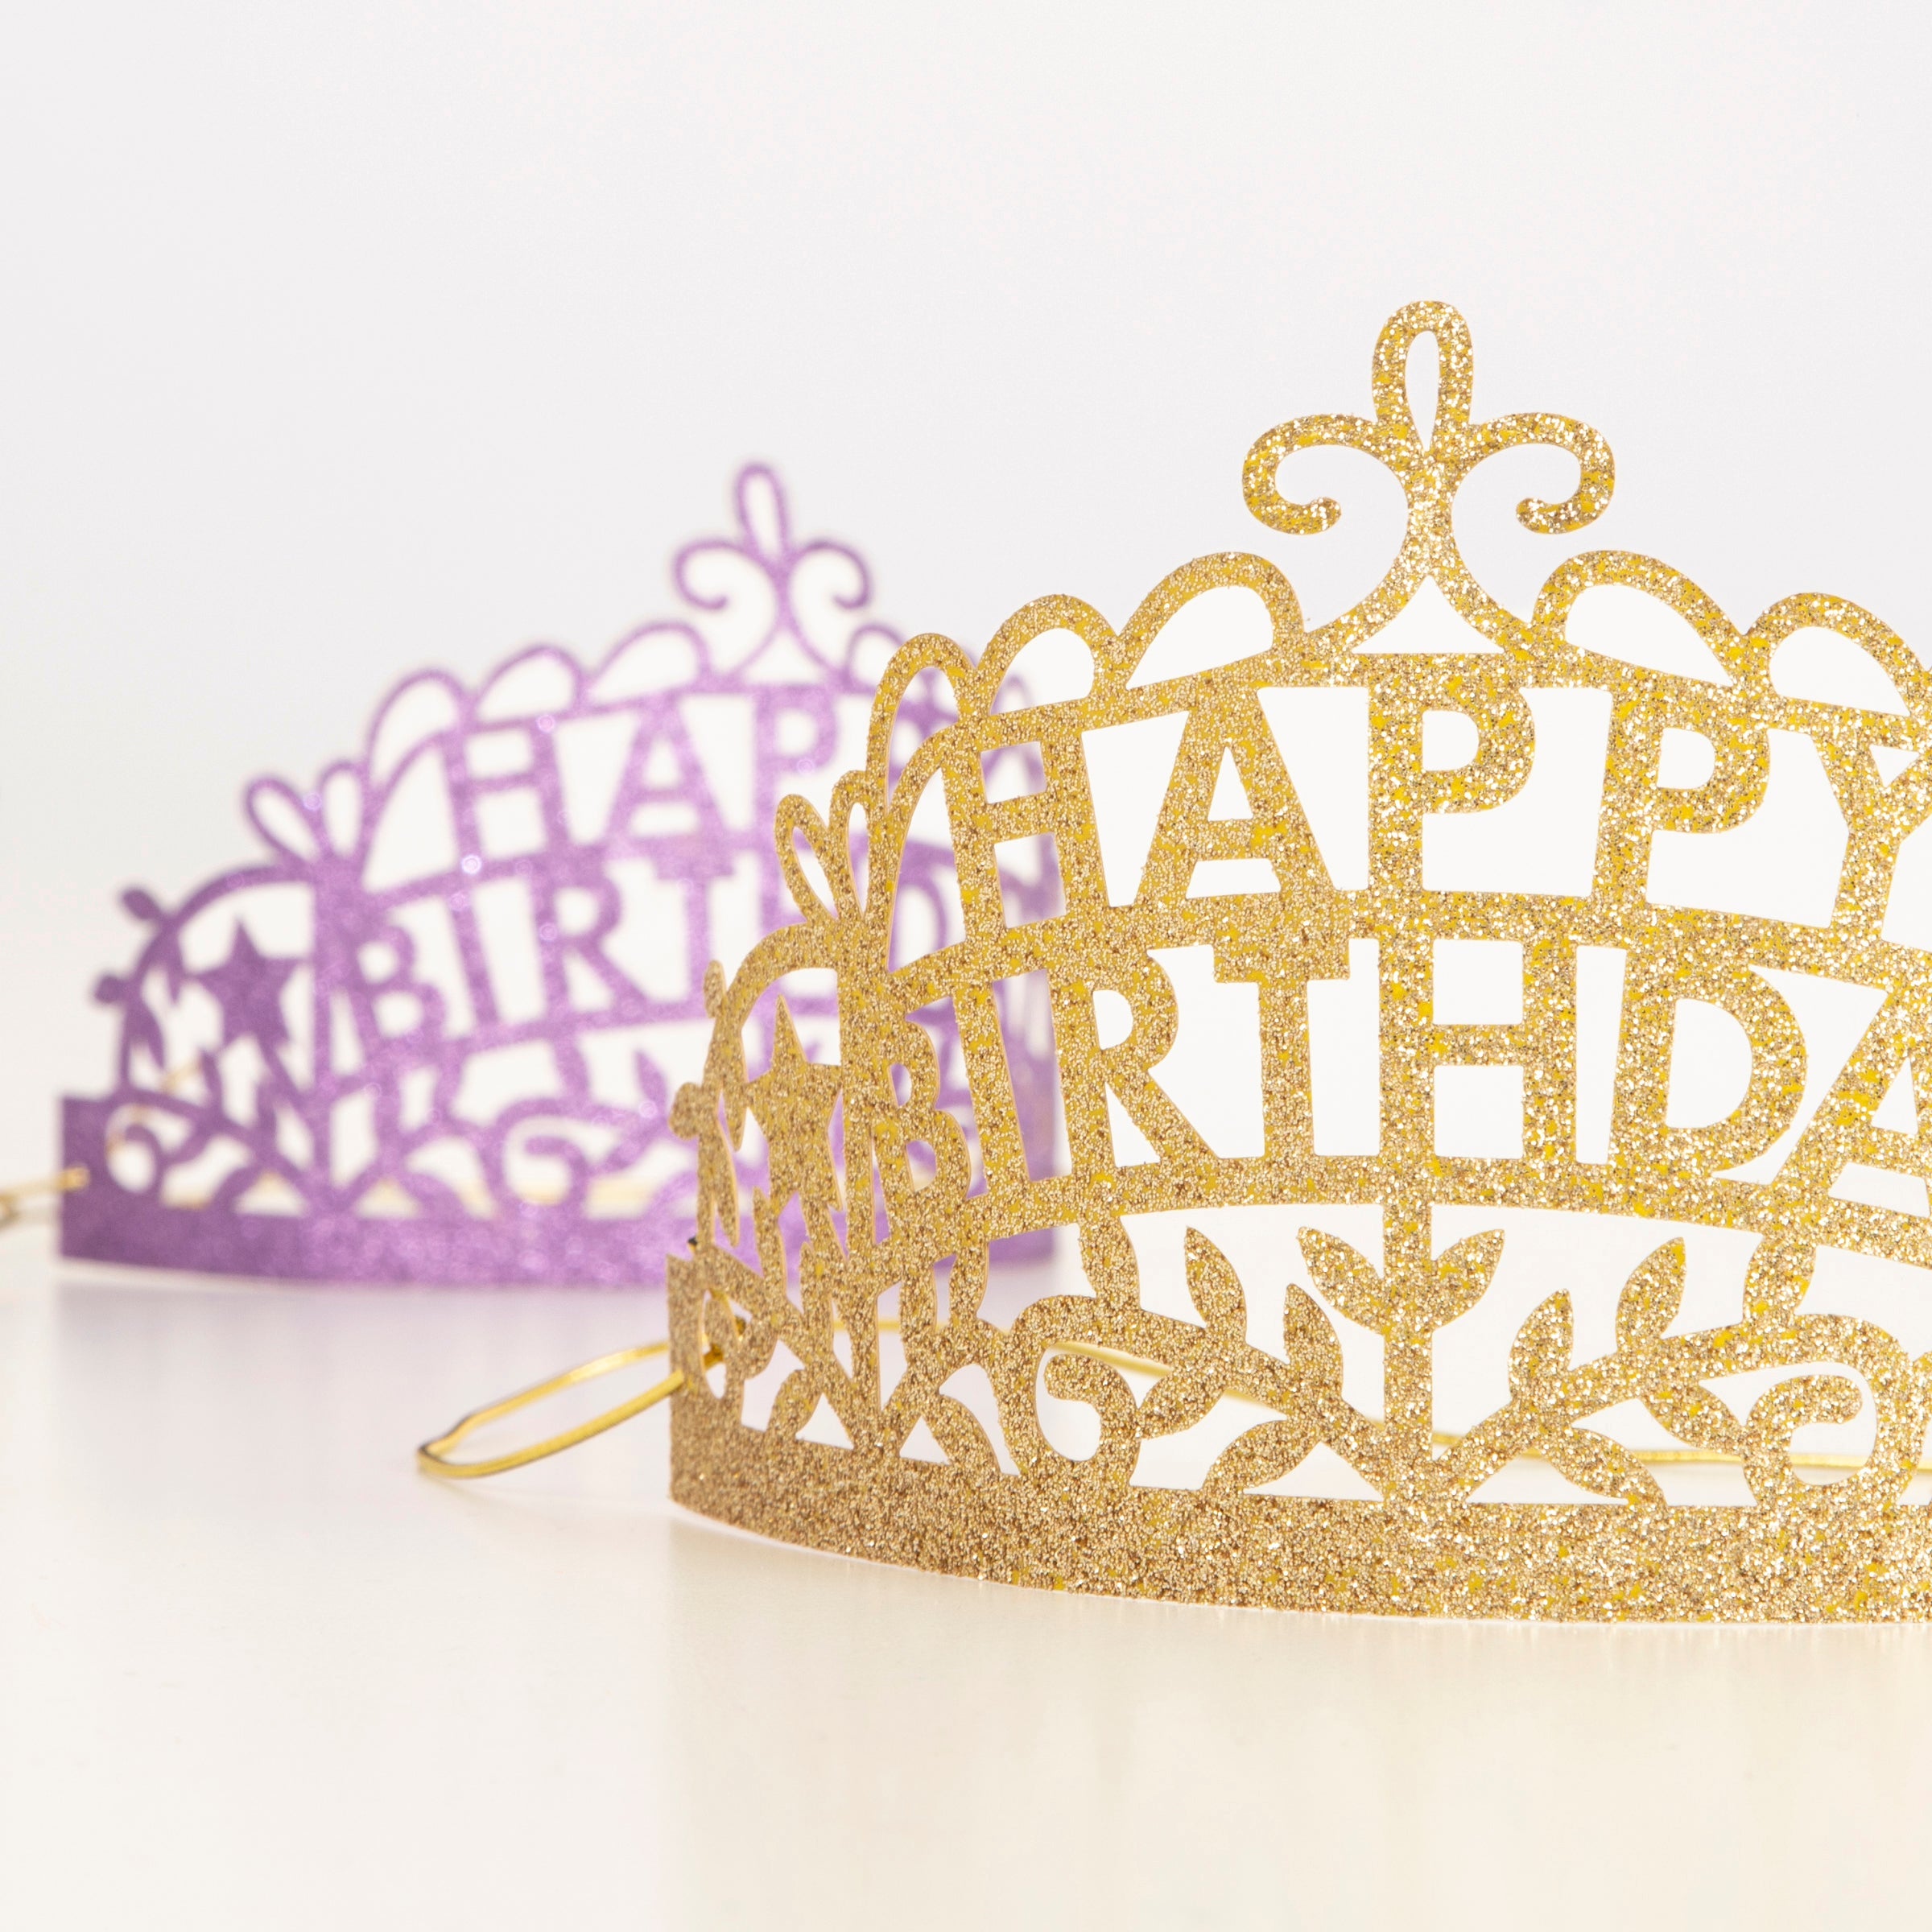 Our princess tiara, a party hat alternative, with lots of glitter is ideal for a princess party or fairy party.